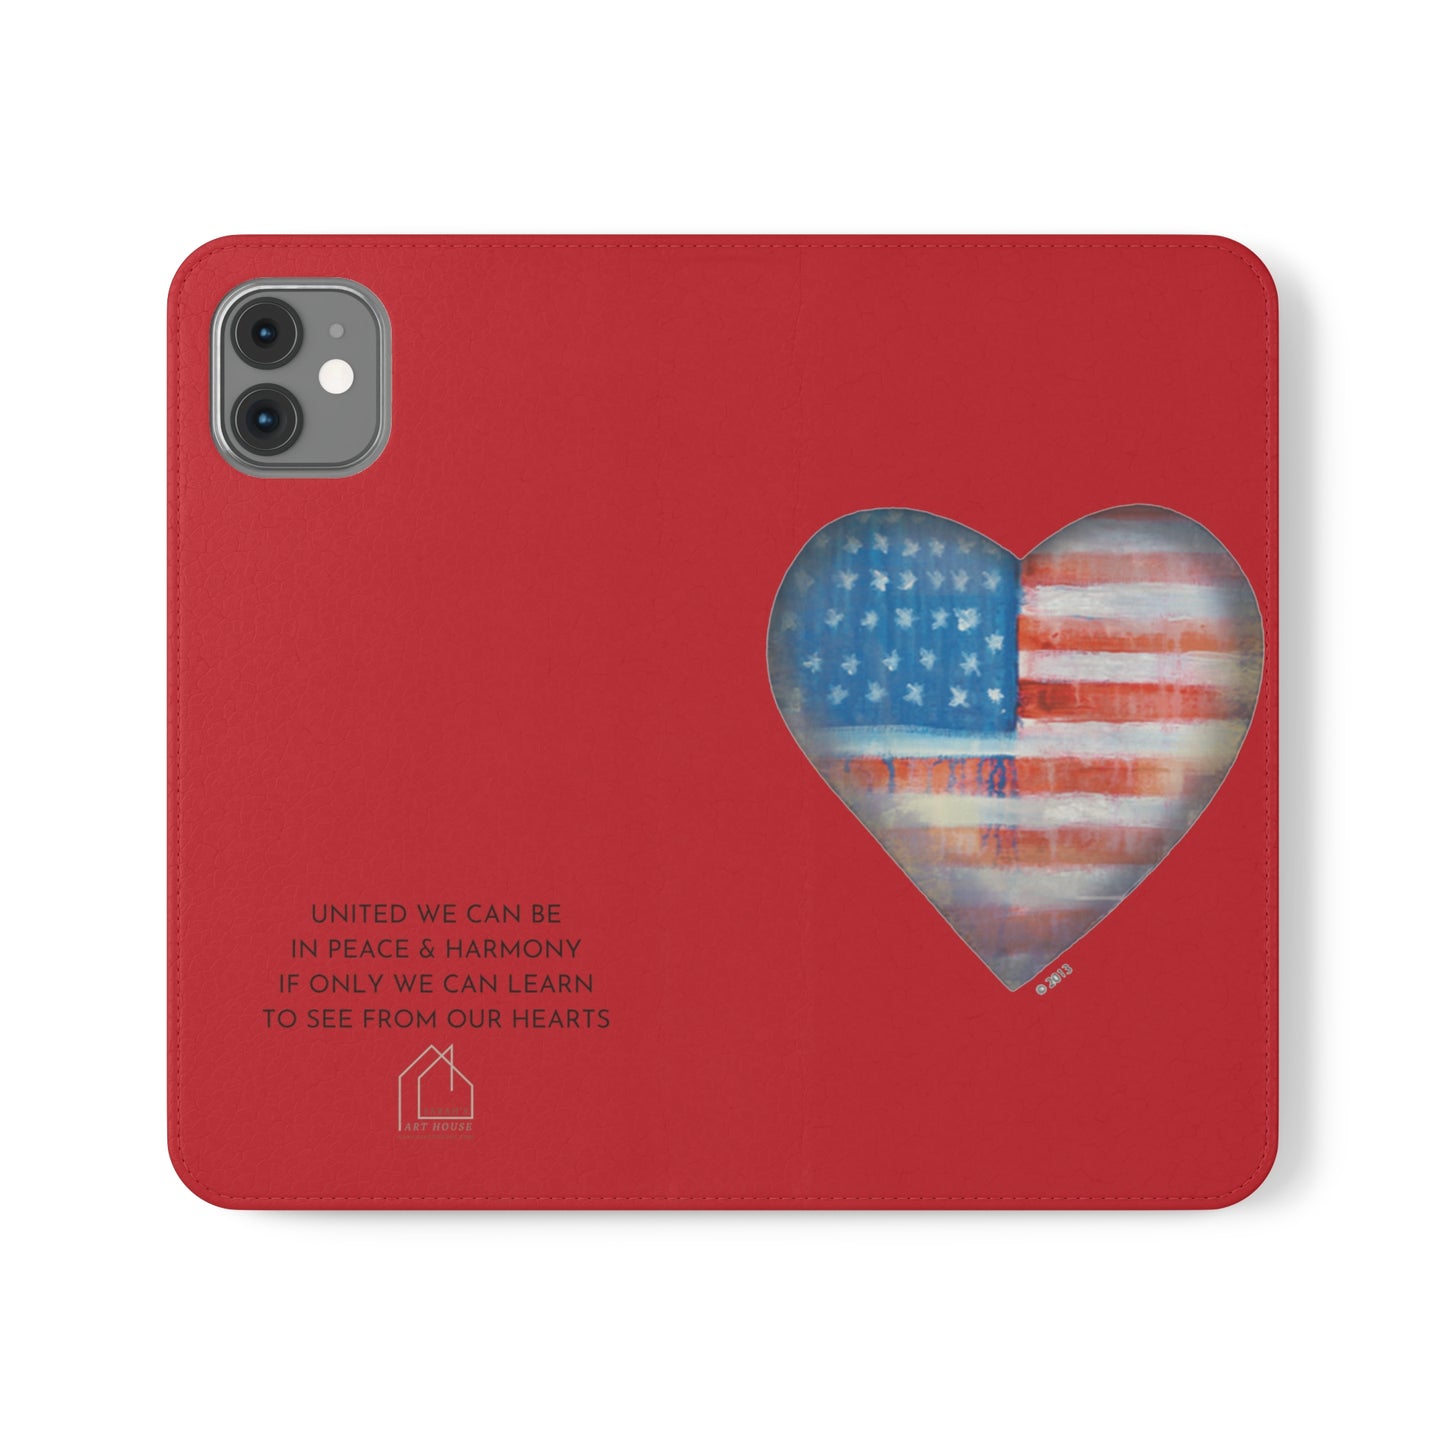 Phone Flip Cases - Wallet phone case - American Heart phone case with poem